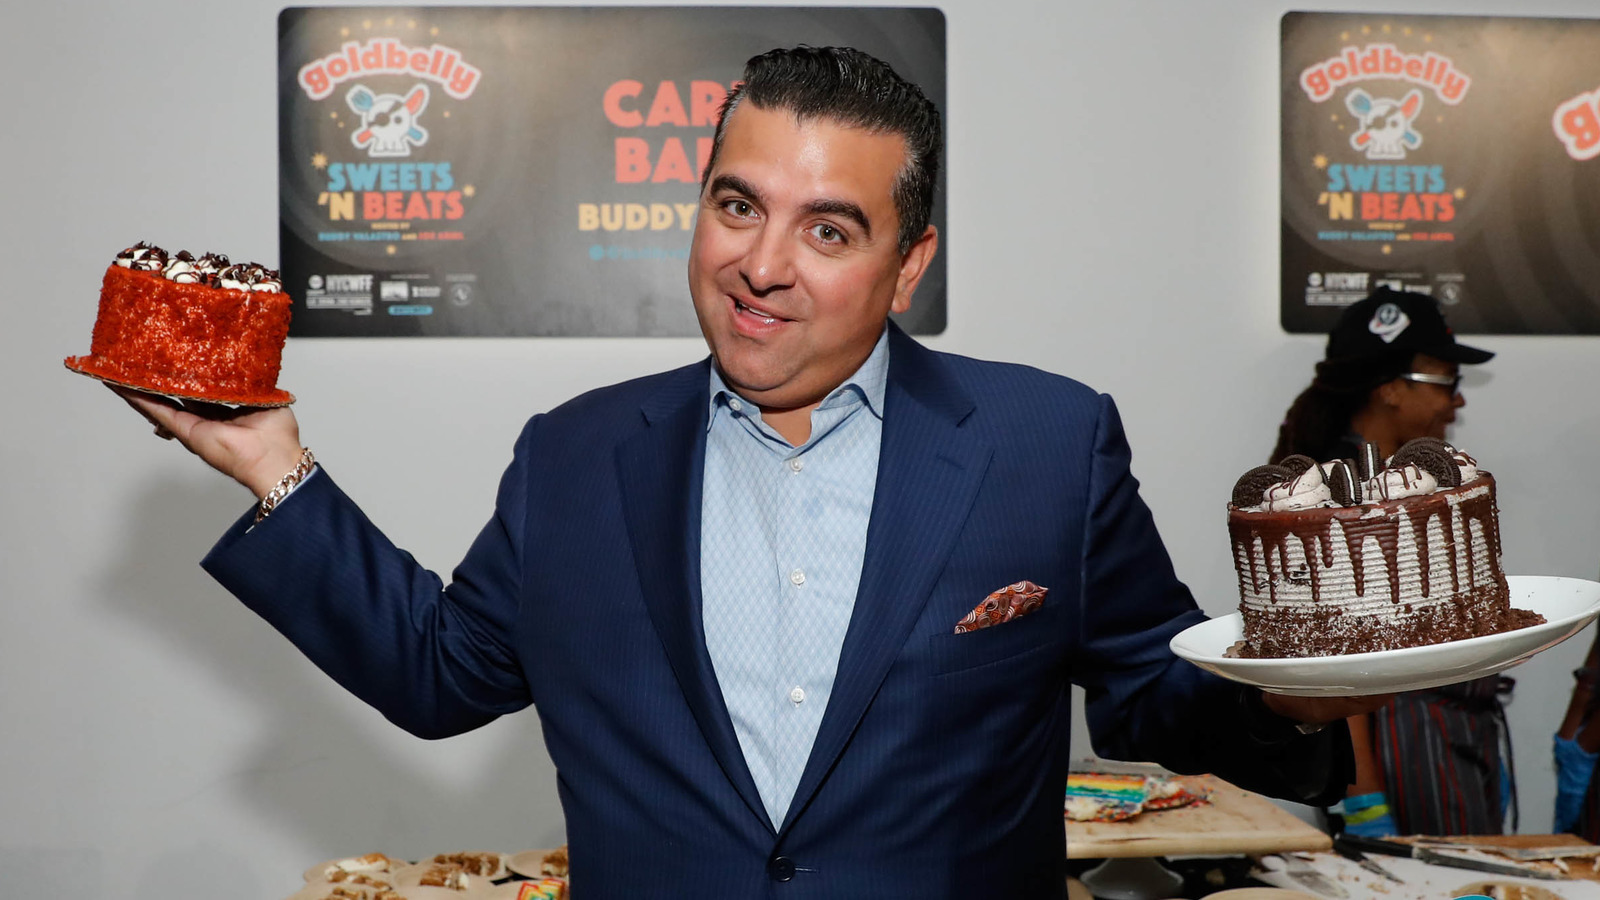 Buddy Valastro Shares His Recovery Journey In Tlc Special